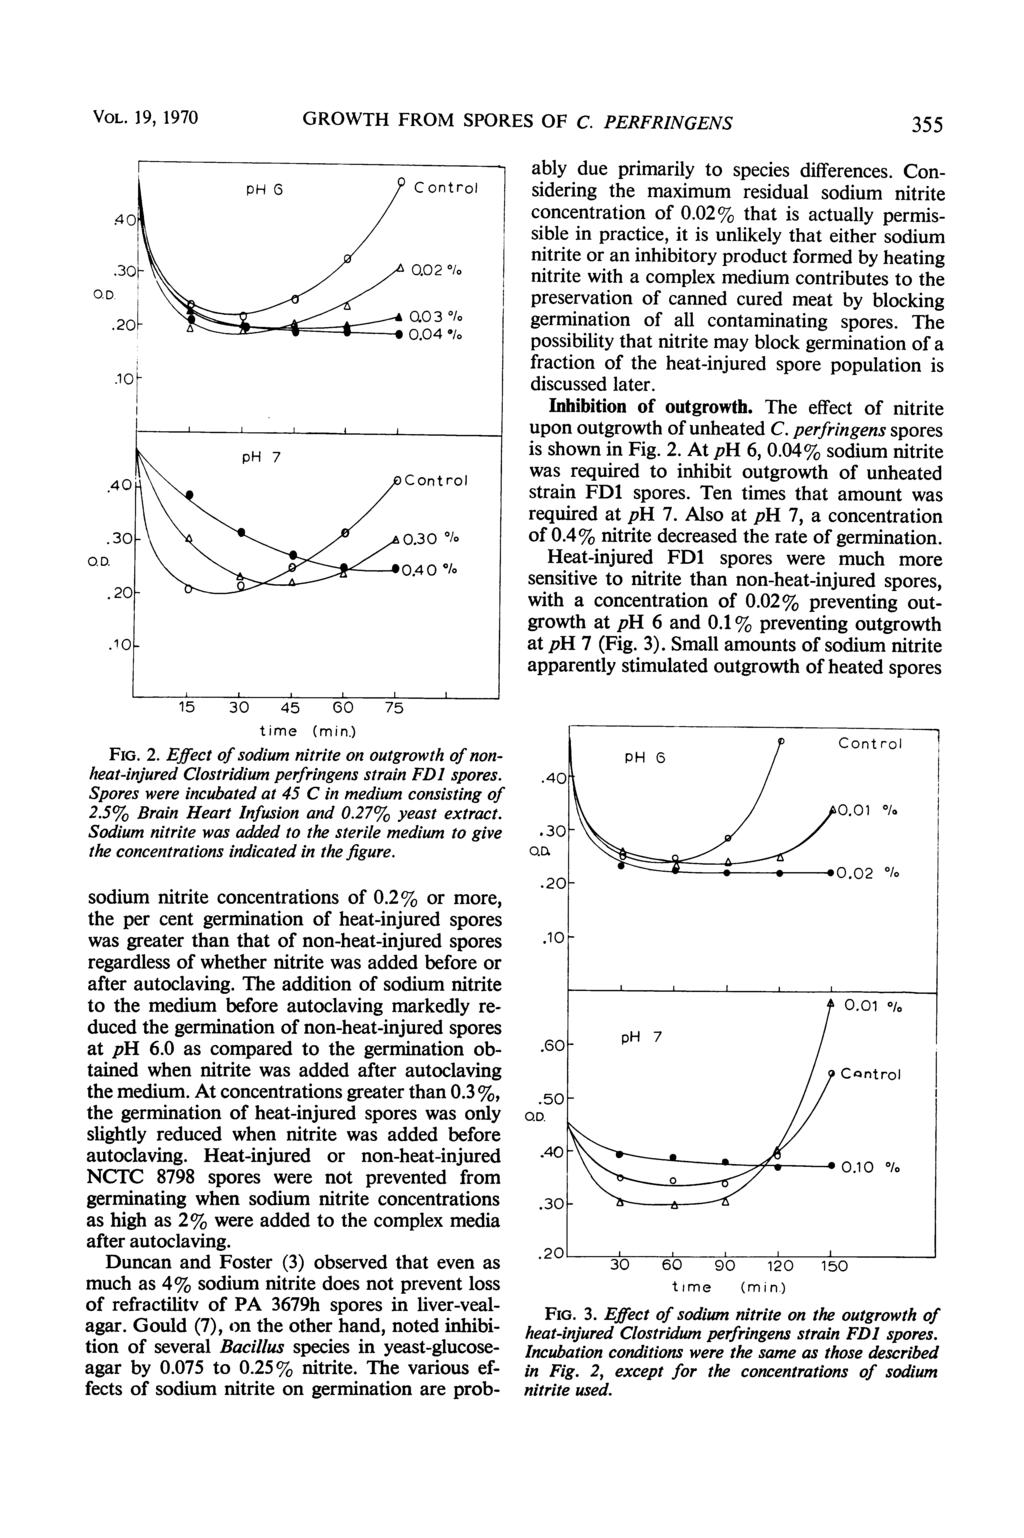 VOL. 19, 1970 GROWTH FROM SPORES OF C. PERFRINGENS 355 ably due primarily to species differences. Coni PH(hi / Controi sidering the maximum residual sodium nitrite l /concentration of 0.